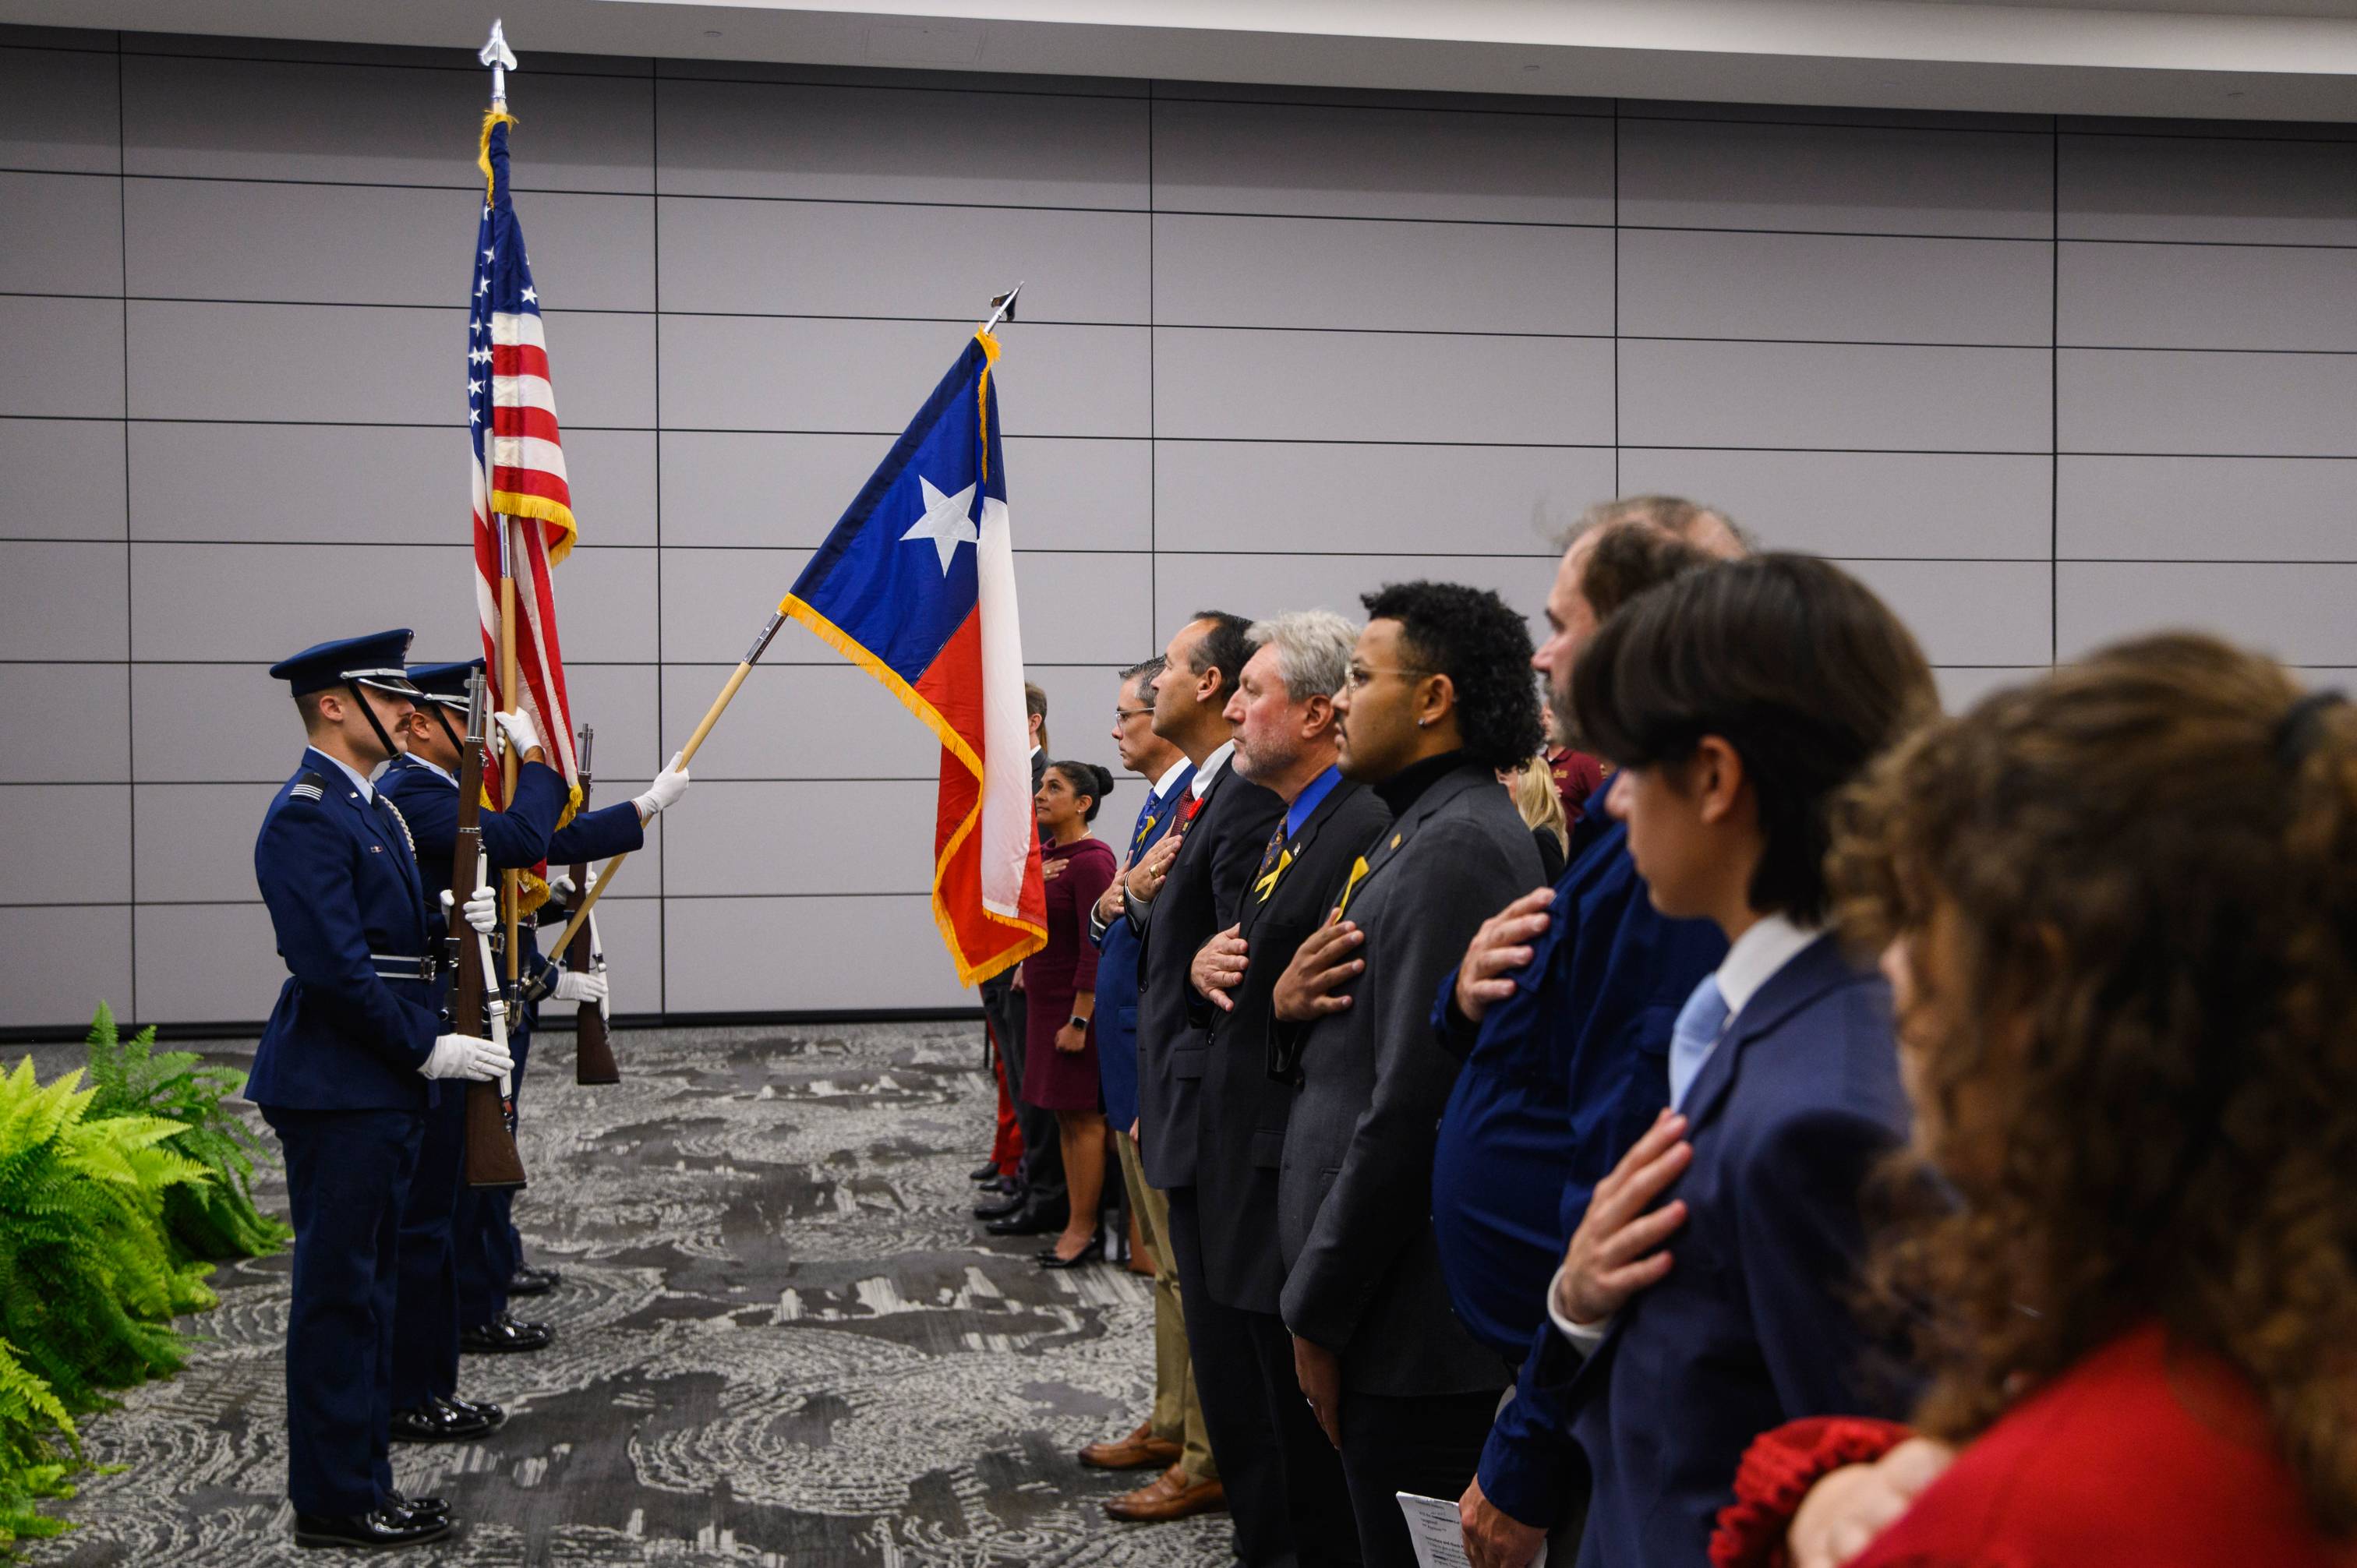 a group says the pledge of allegiance to the texas flag. there is a veteran holding the flag, and there is a U.S. flag in the background.